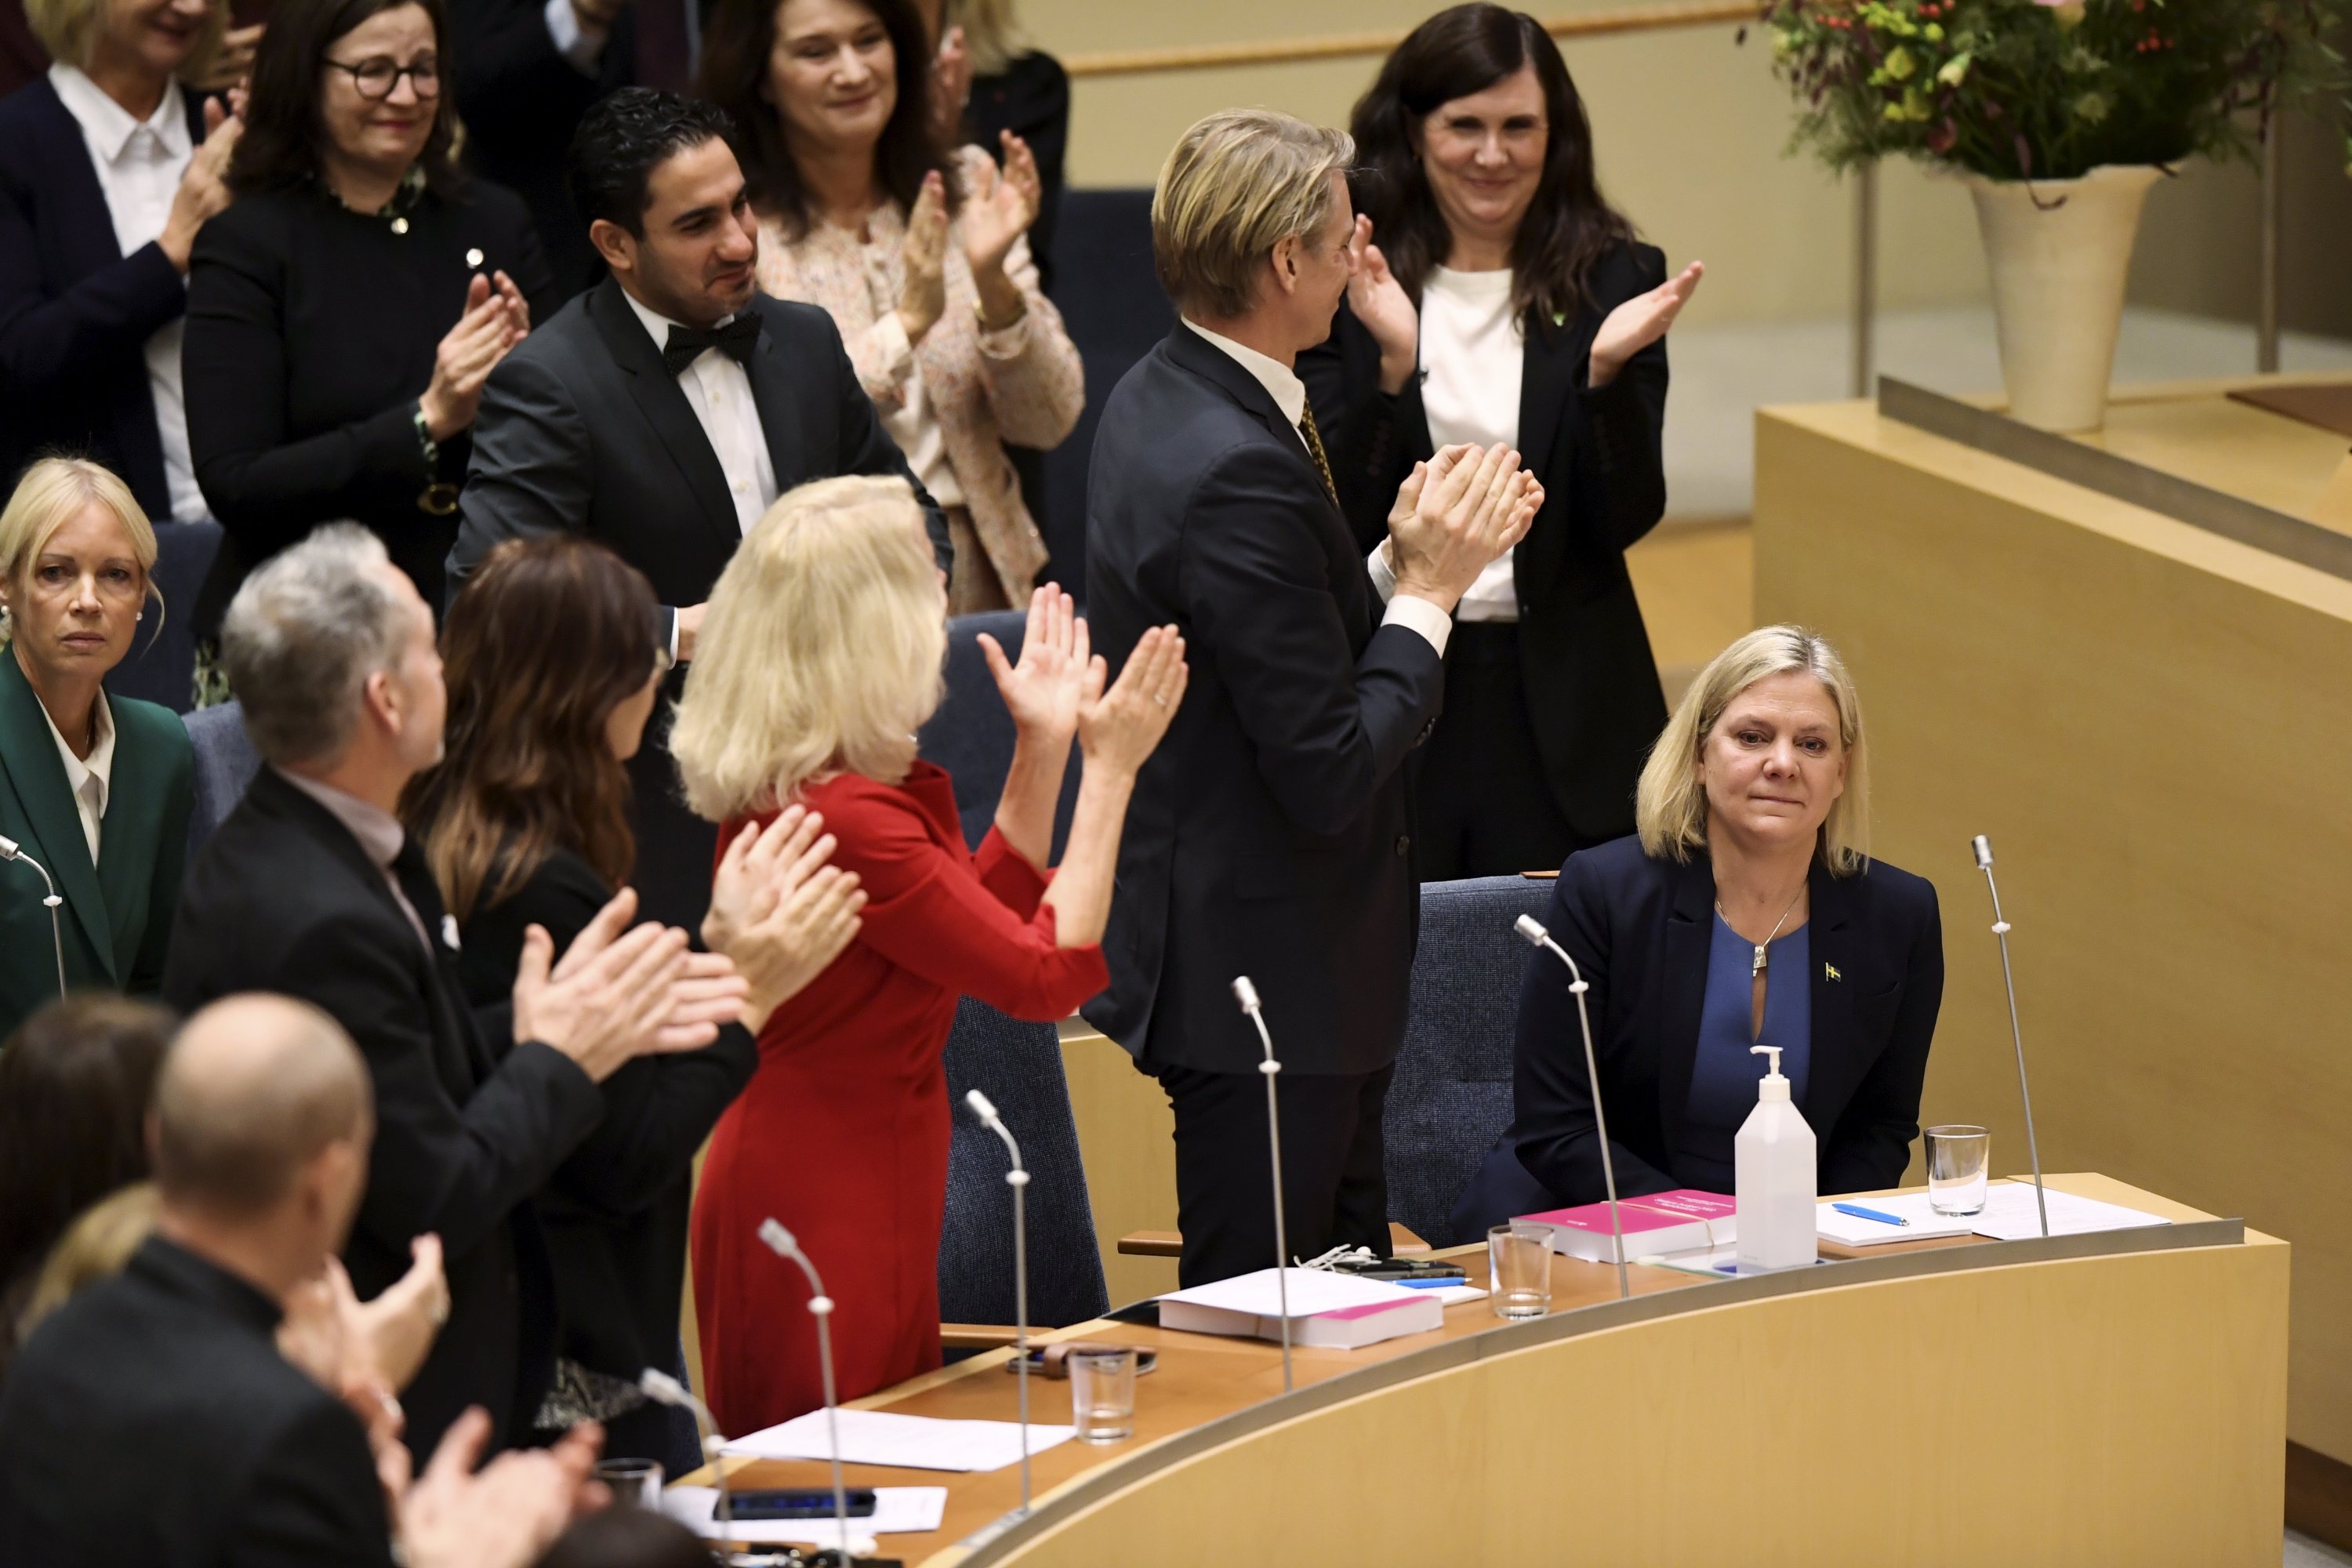 Finance Minister and Social Democratic Party leader Magdalena Andersson (R) is congratulated after being appointed as new prime minister after a voting in the the Swedish parliament in Stockholm, Sweden, Nov. 24, 2021. (Erik Simander/TT News Agency via EPA)